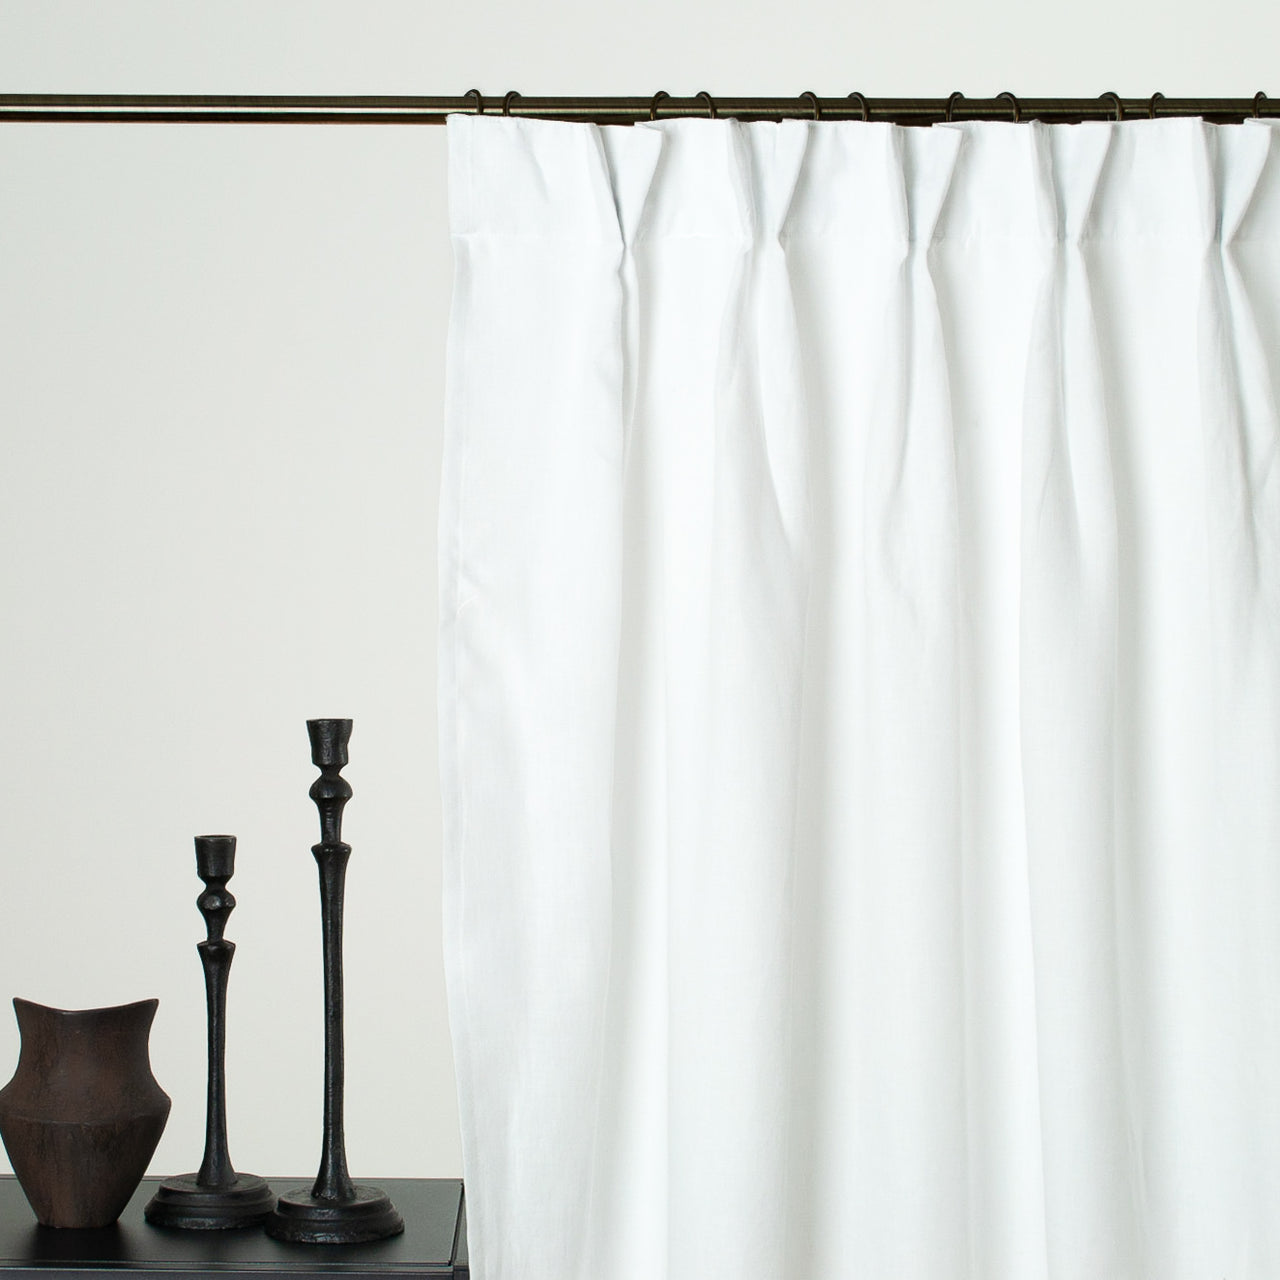 Dutch Pleat Linen Curtain Panel with Cotton or Blackout Lining - Heading for Rings and Hooks